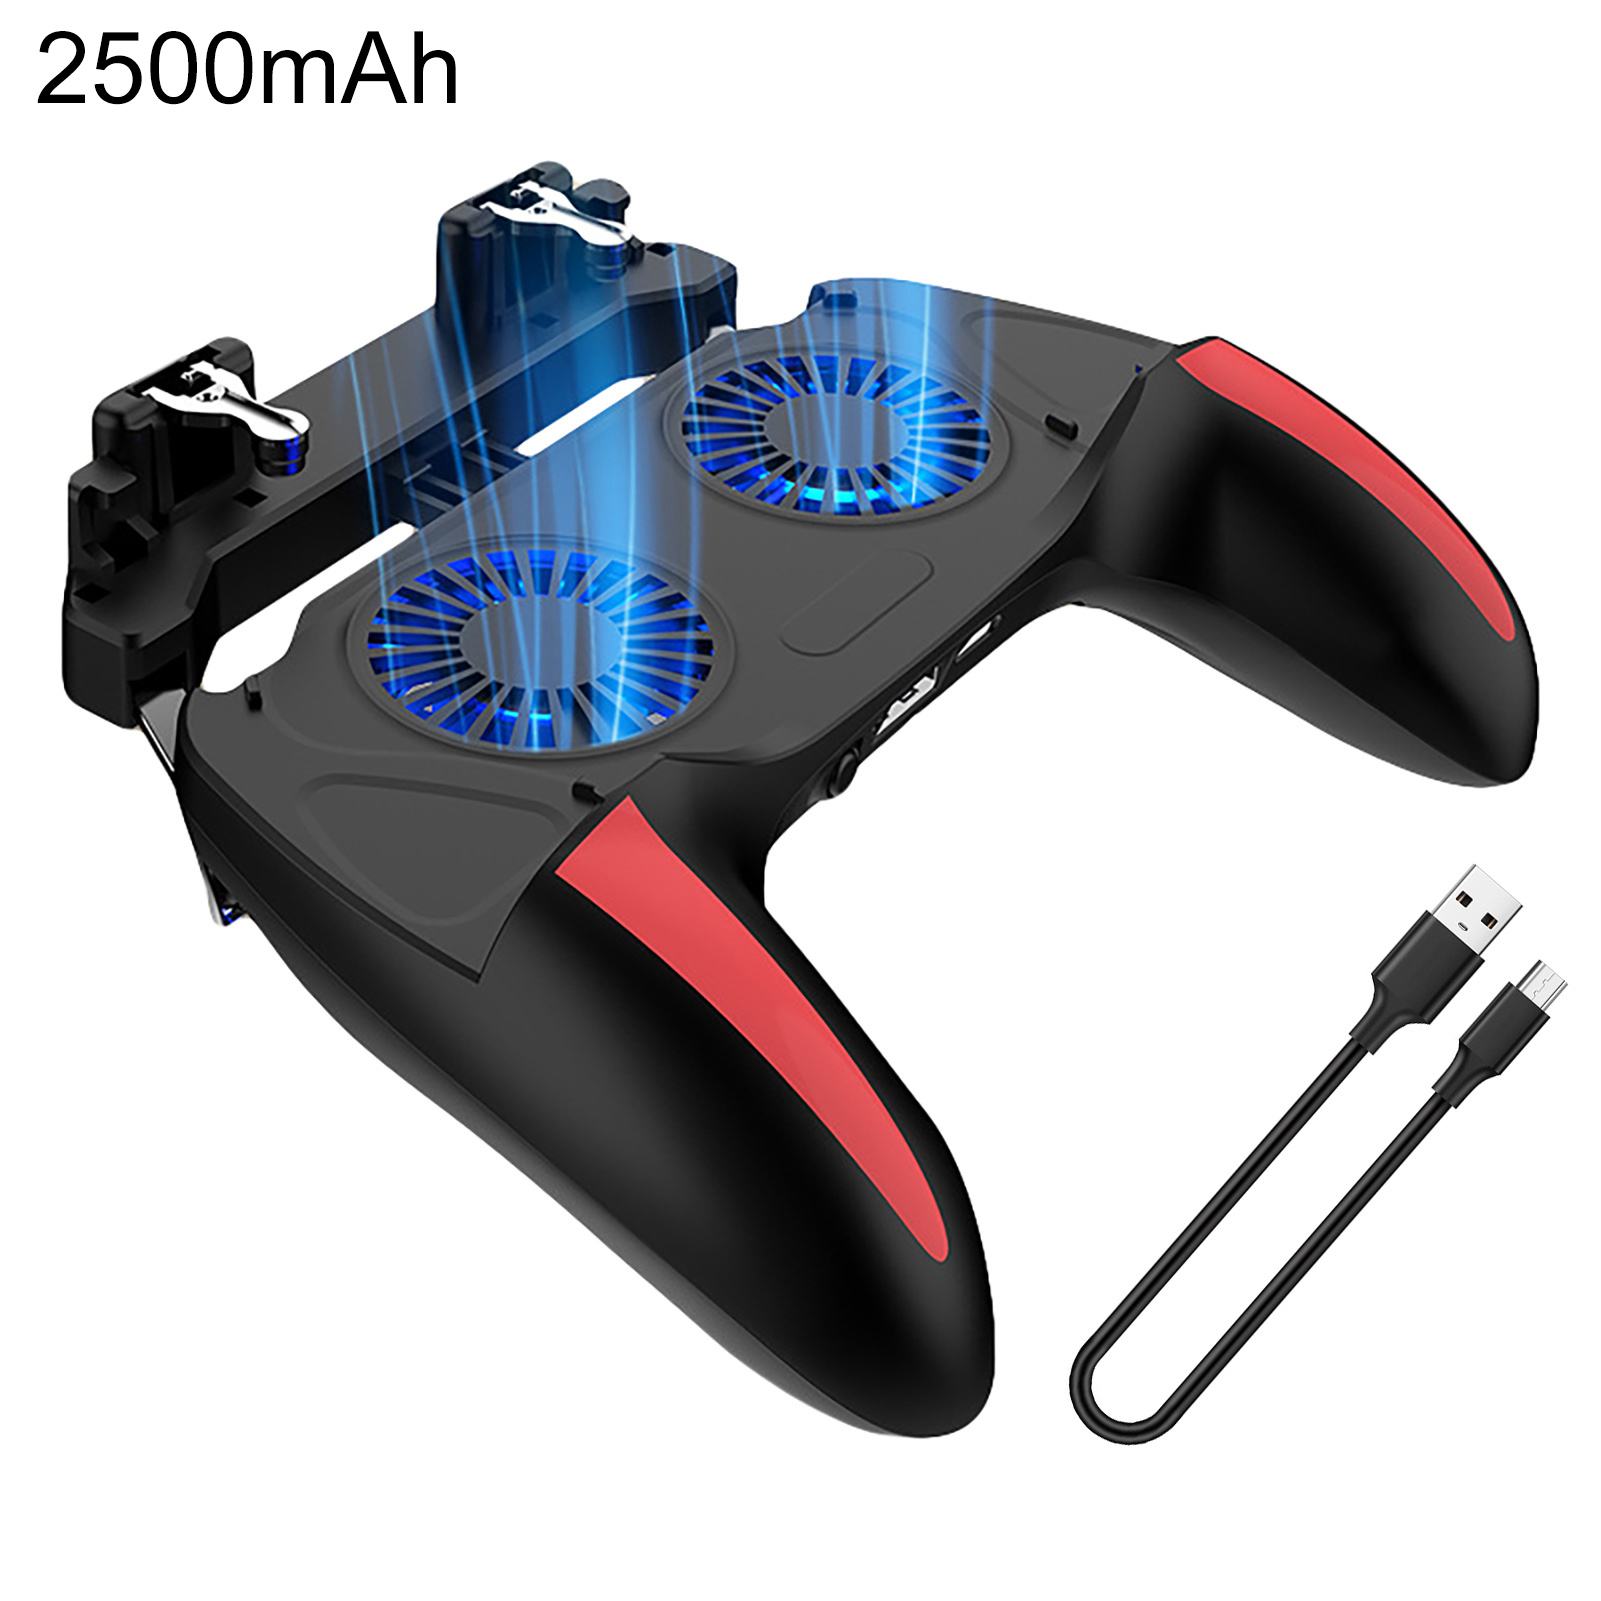 H10 Game Gamepad Ergonomic Sensitive No Delay Four Finger Mobile Phone Gaming Trigger Grip Handle for Android - 2500